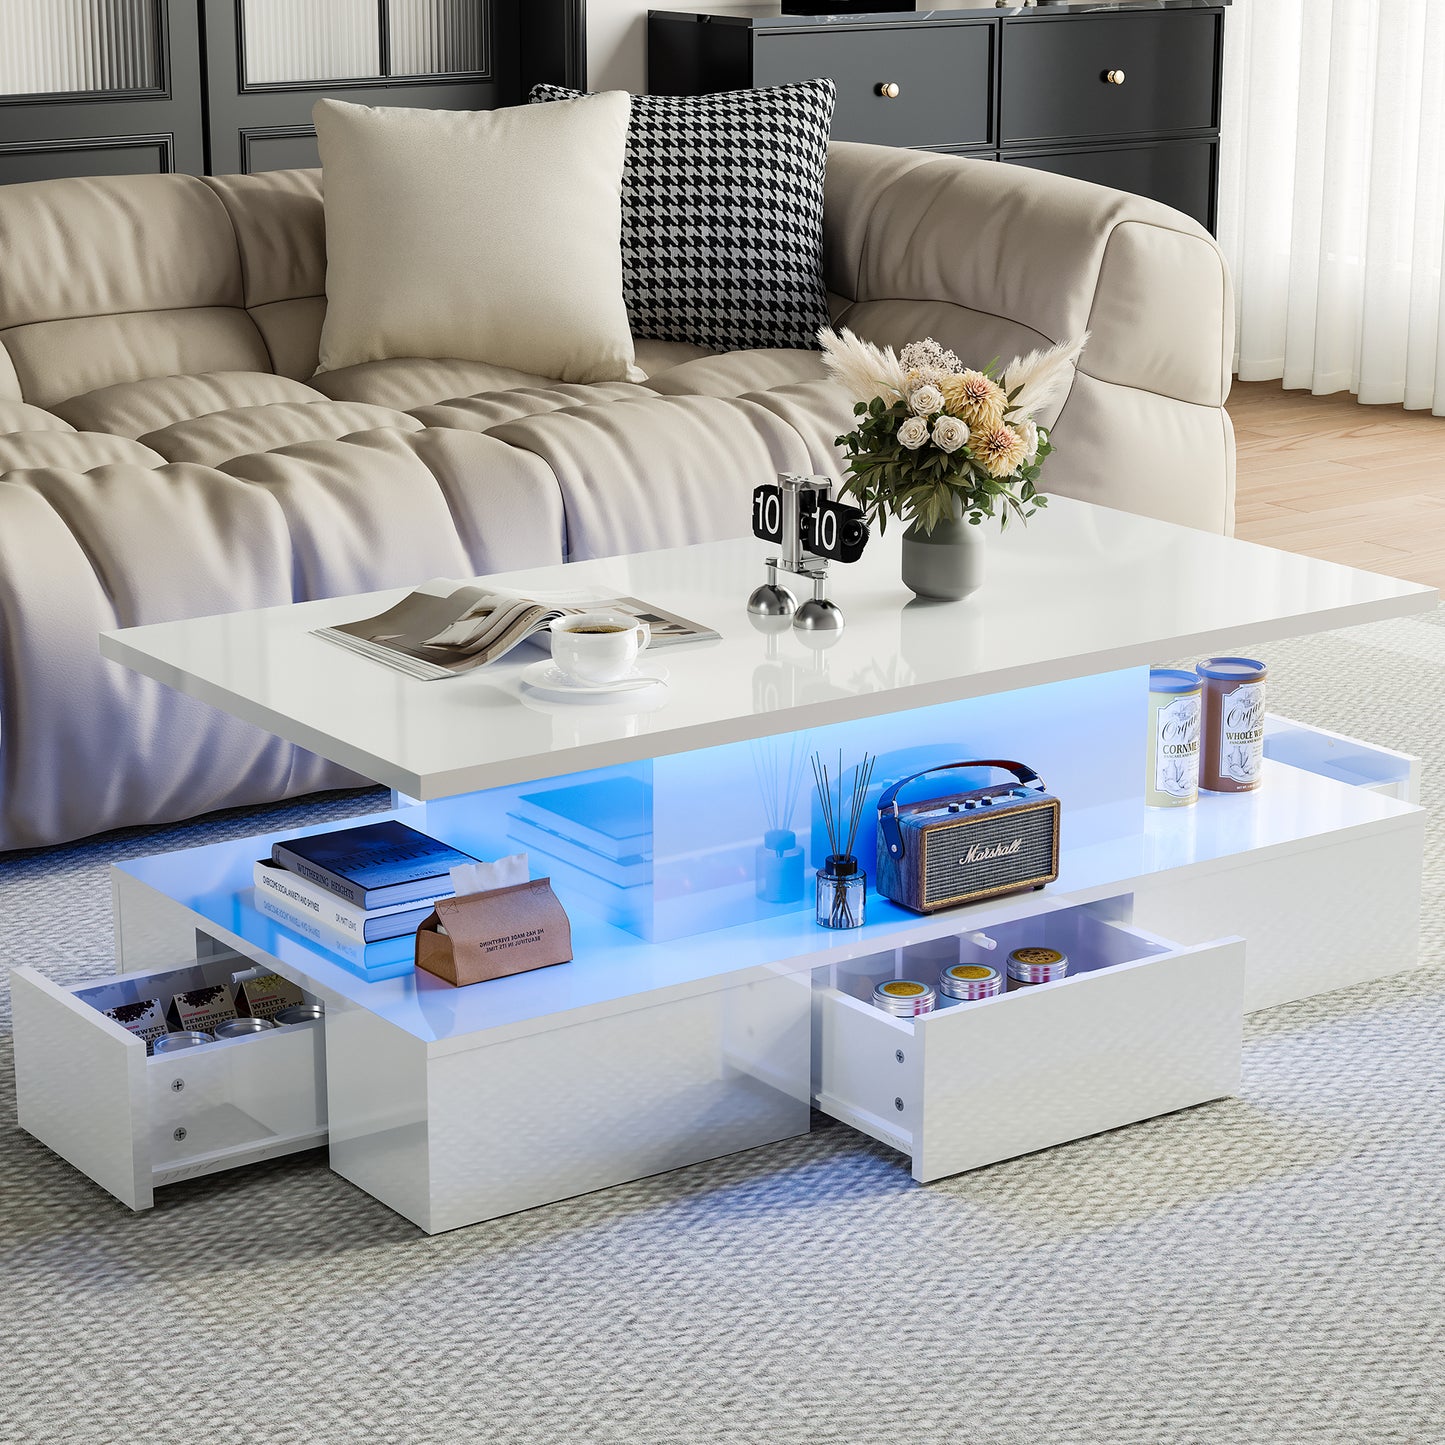 HSUNNS Black LED Coffee Table for Living Room, Modern High Glossy Center Table with 4 Drawers, Smart Cocktail Table Rectangle, Sofa Side Tea Tables with LED Lights, 40" L×24" W×15" H